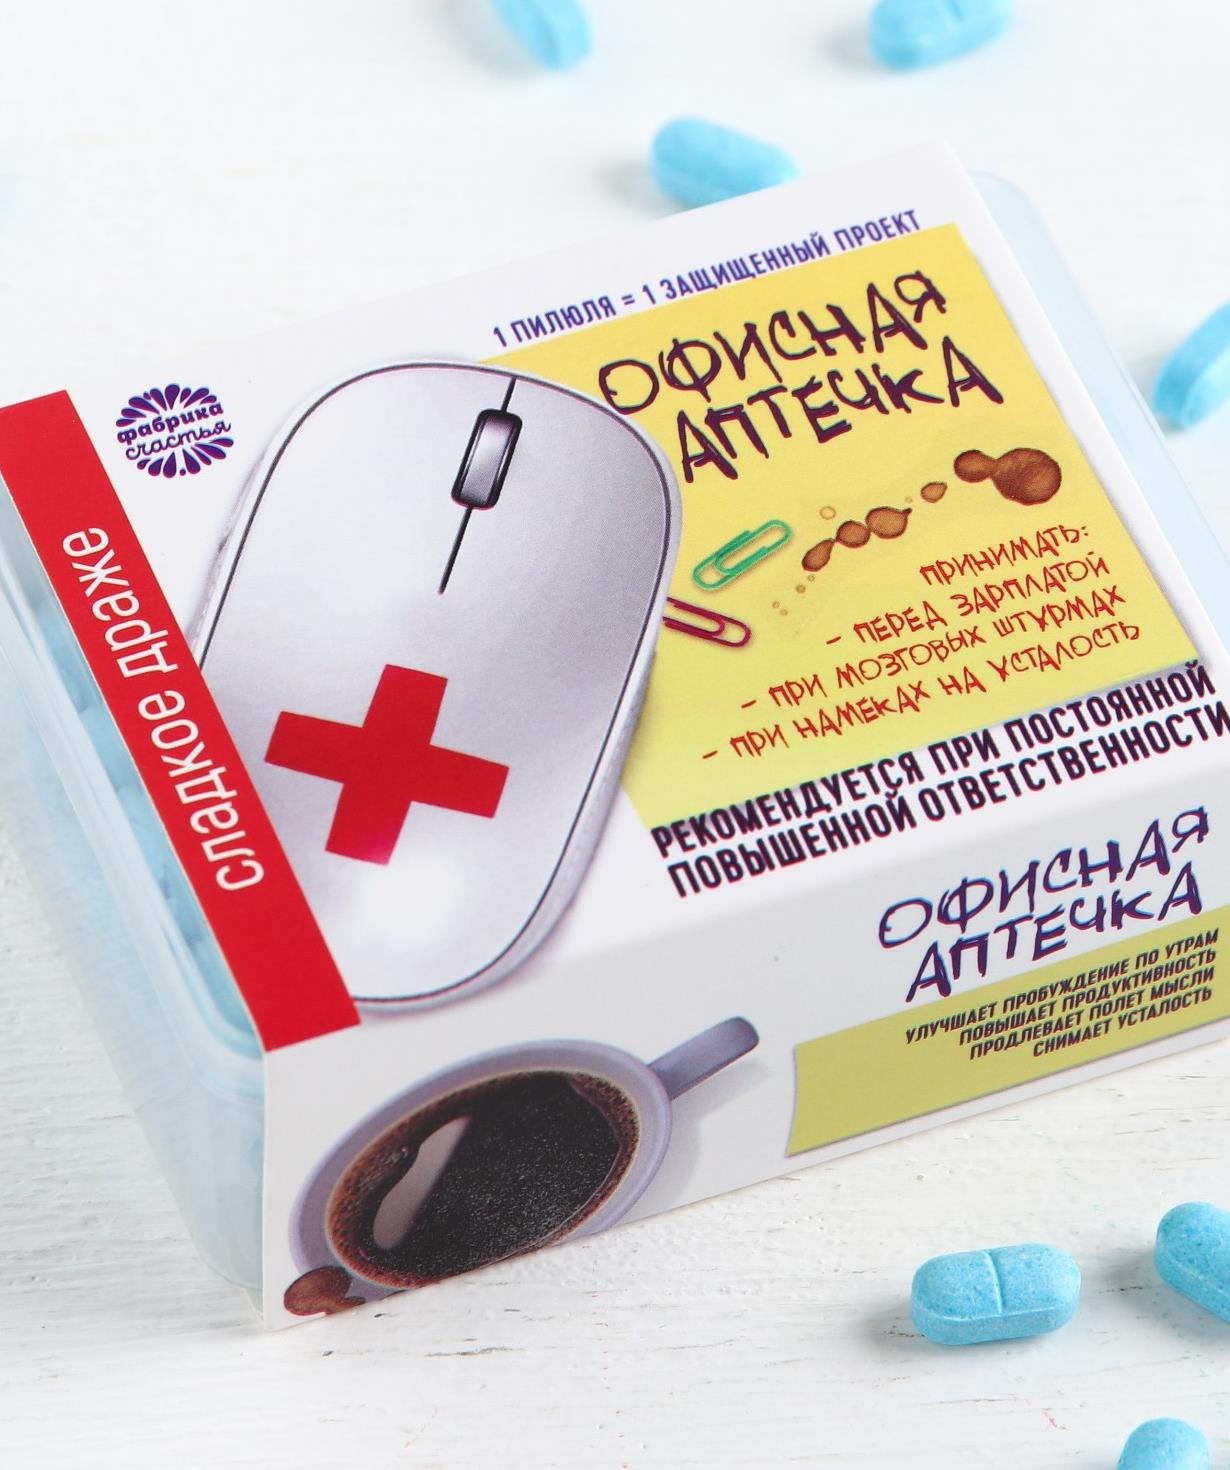 Sweets `Jpit.am` in a pill box, Офисная аптечка